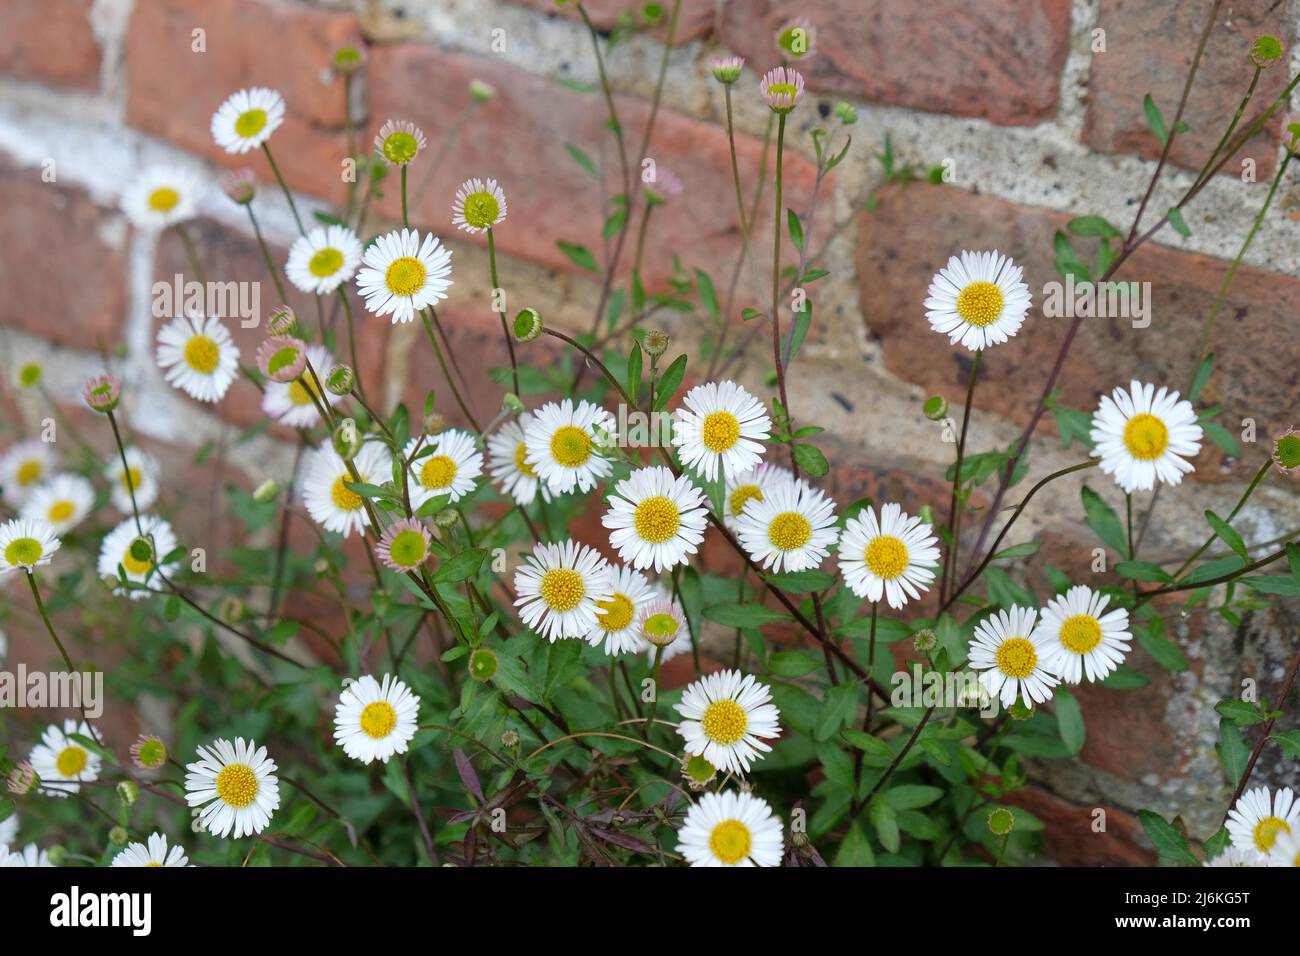 Mexican fleabane daisies in flower. Stock Photo